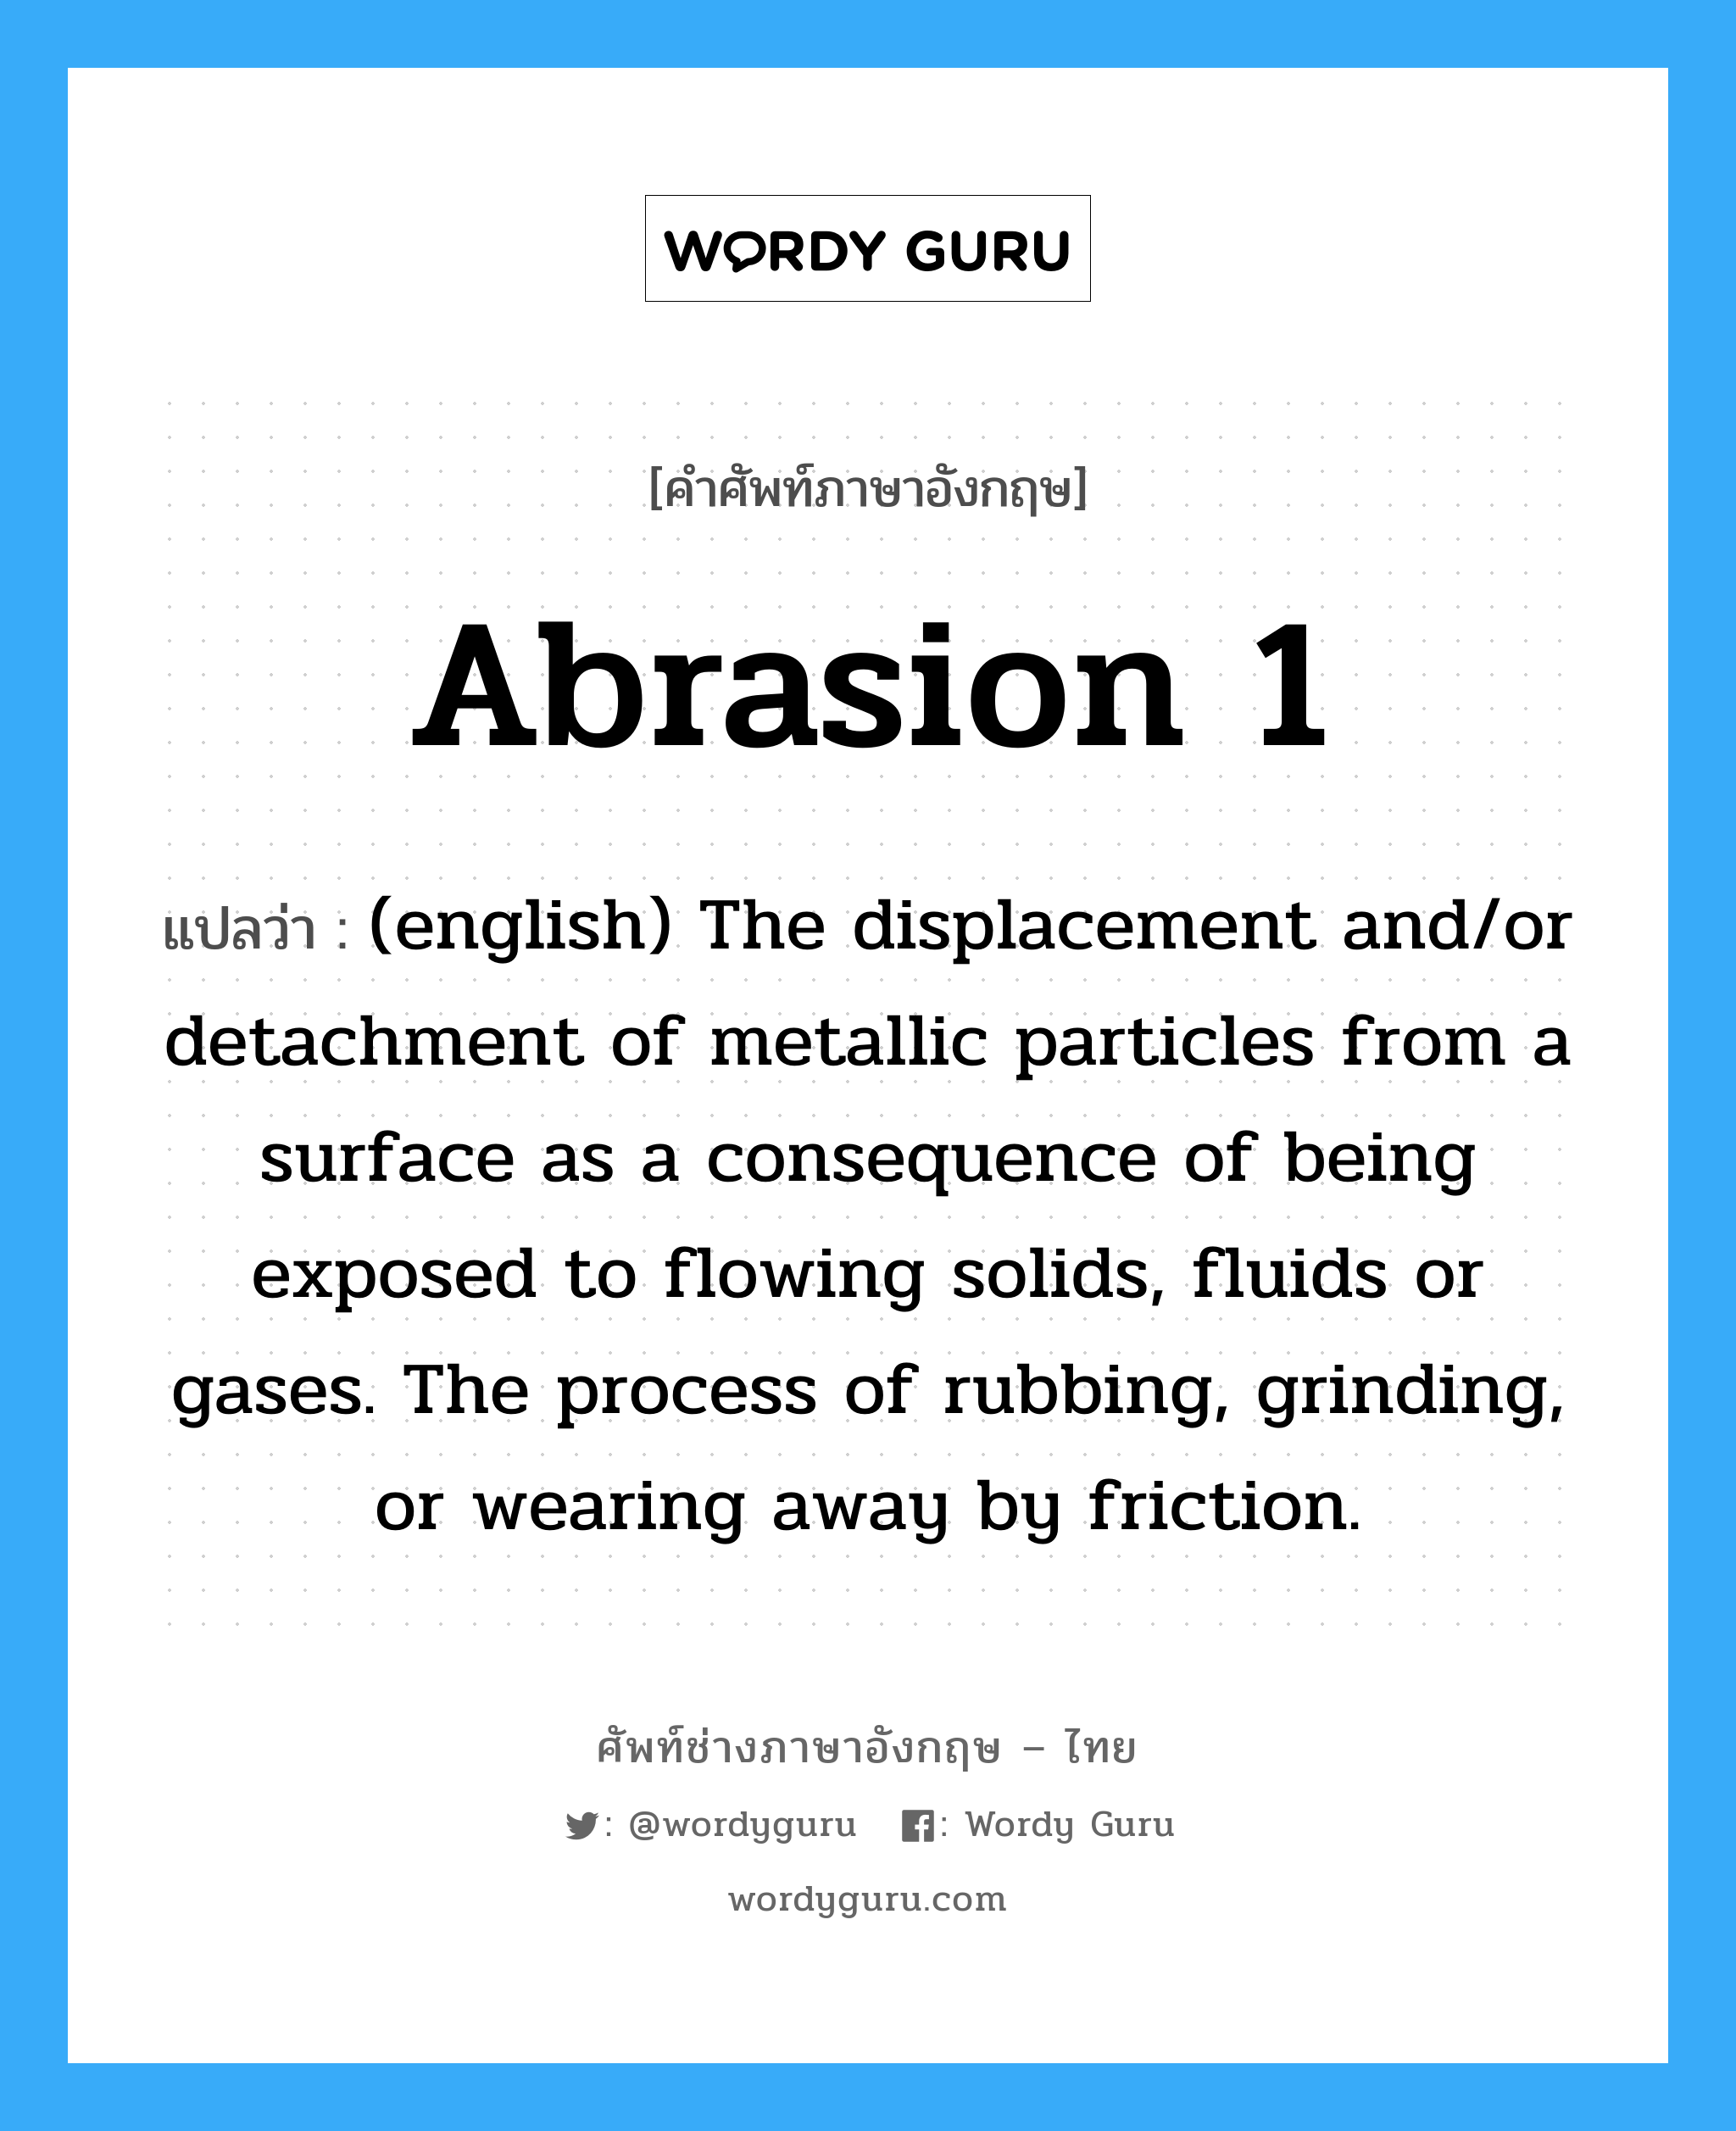 Abrasion 1 แปลว่า?, คำศัพท์ช่างภาษาอังกฤษ - ไทย Abrasion 1 คำศัพท์ภาษาอังกฤษ Abrasion 1 แปลว่า (english) The displacement and/or detachment of metallic particles from a surface as a consequence of being exposed to flowing solids, fluids or gases. The process of rubbing, grinding, or wearing away by friction.